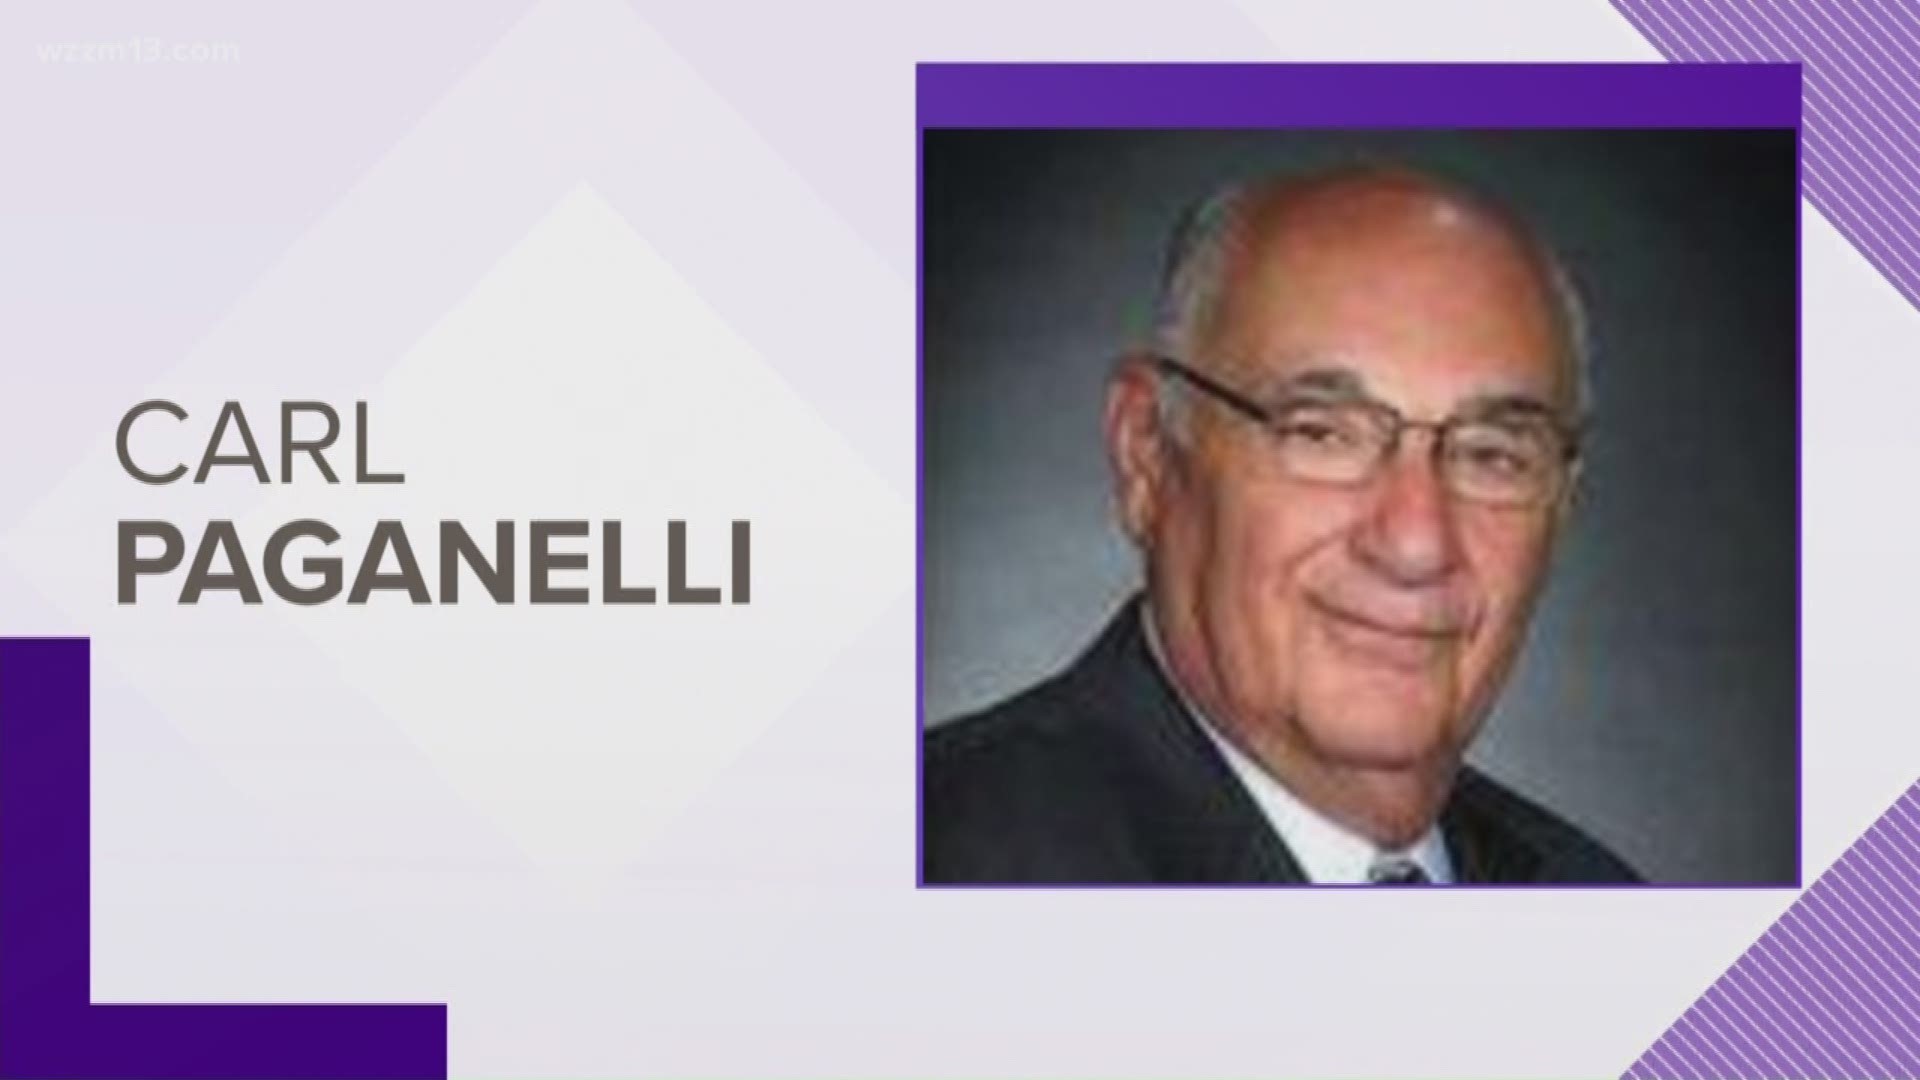 Paganelli officiated in the United States Football League, the World Football League, Arena Football League and small colleges. He also served as the head of officials for the Mid-American Conference.